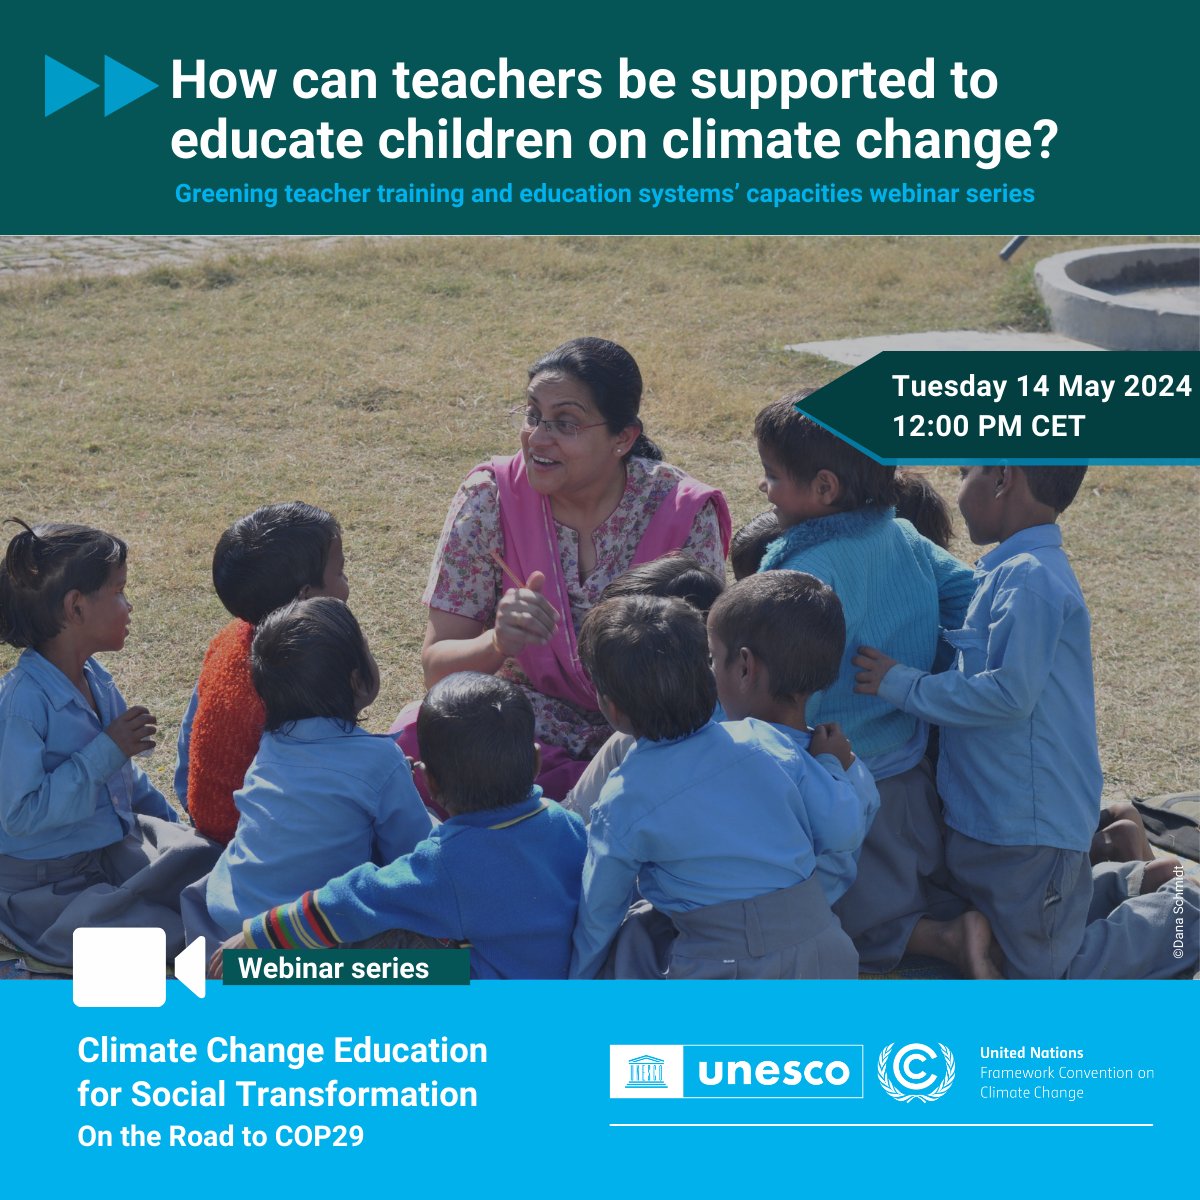 How can teachers be supported to educate children on climate change? Join Session 1 of @UNESCO @UNFCCC webinar series on Climate Change Education for Social Transformation to learn more. 📅 14 May at 12pm CET ➡️ Register: tinyurl.com/yc8fduv3